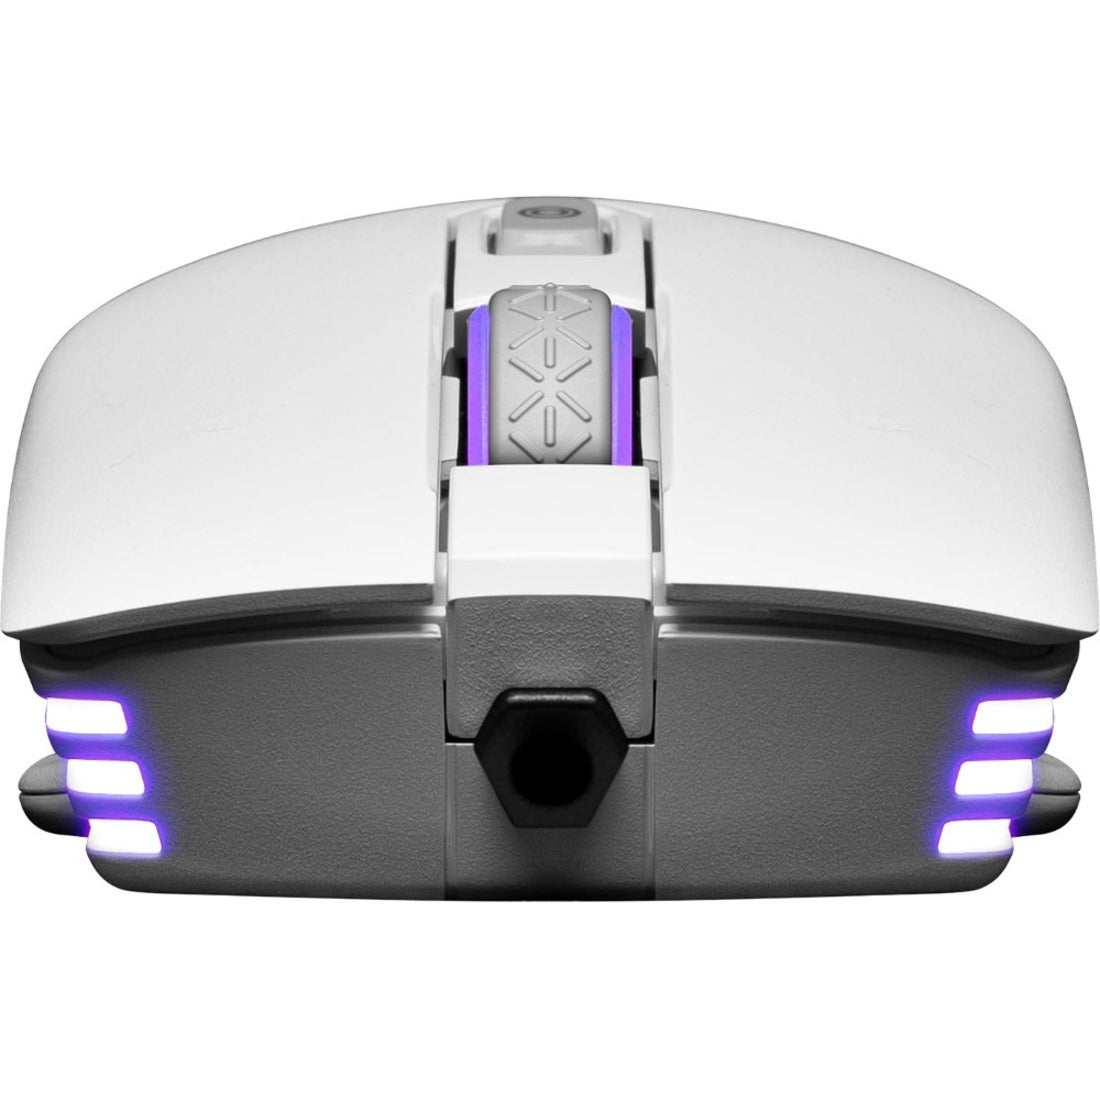 EVGA 905-W1-12WH-KR X12 Gaming Mouse, Ergonomic Fit, 16000 dpi, 8 Programmable Buttons